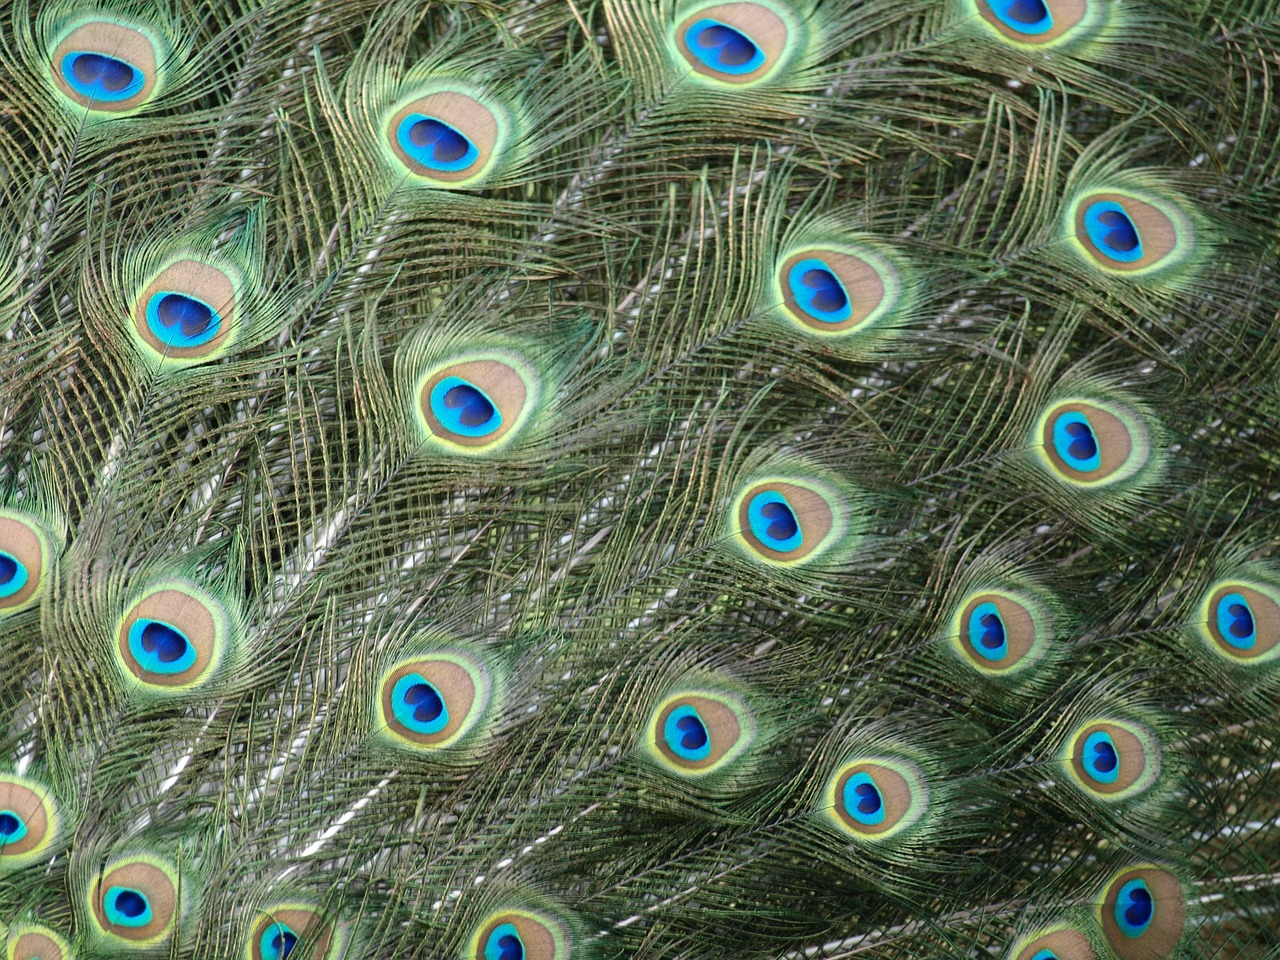 a large peacock's feathers showing all the colors